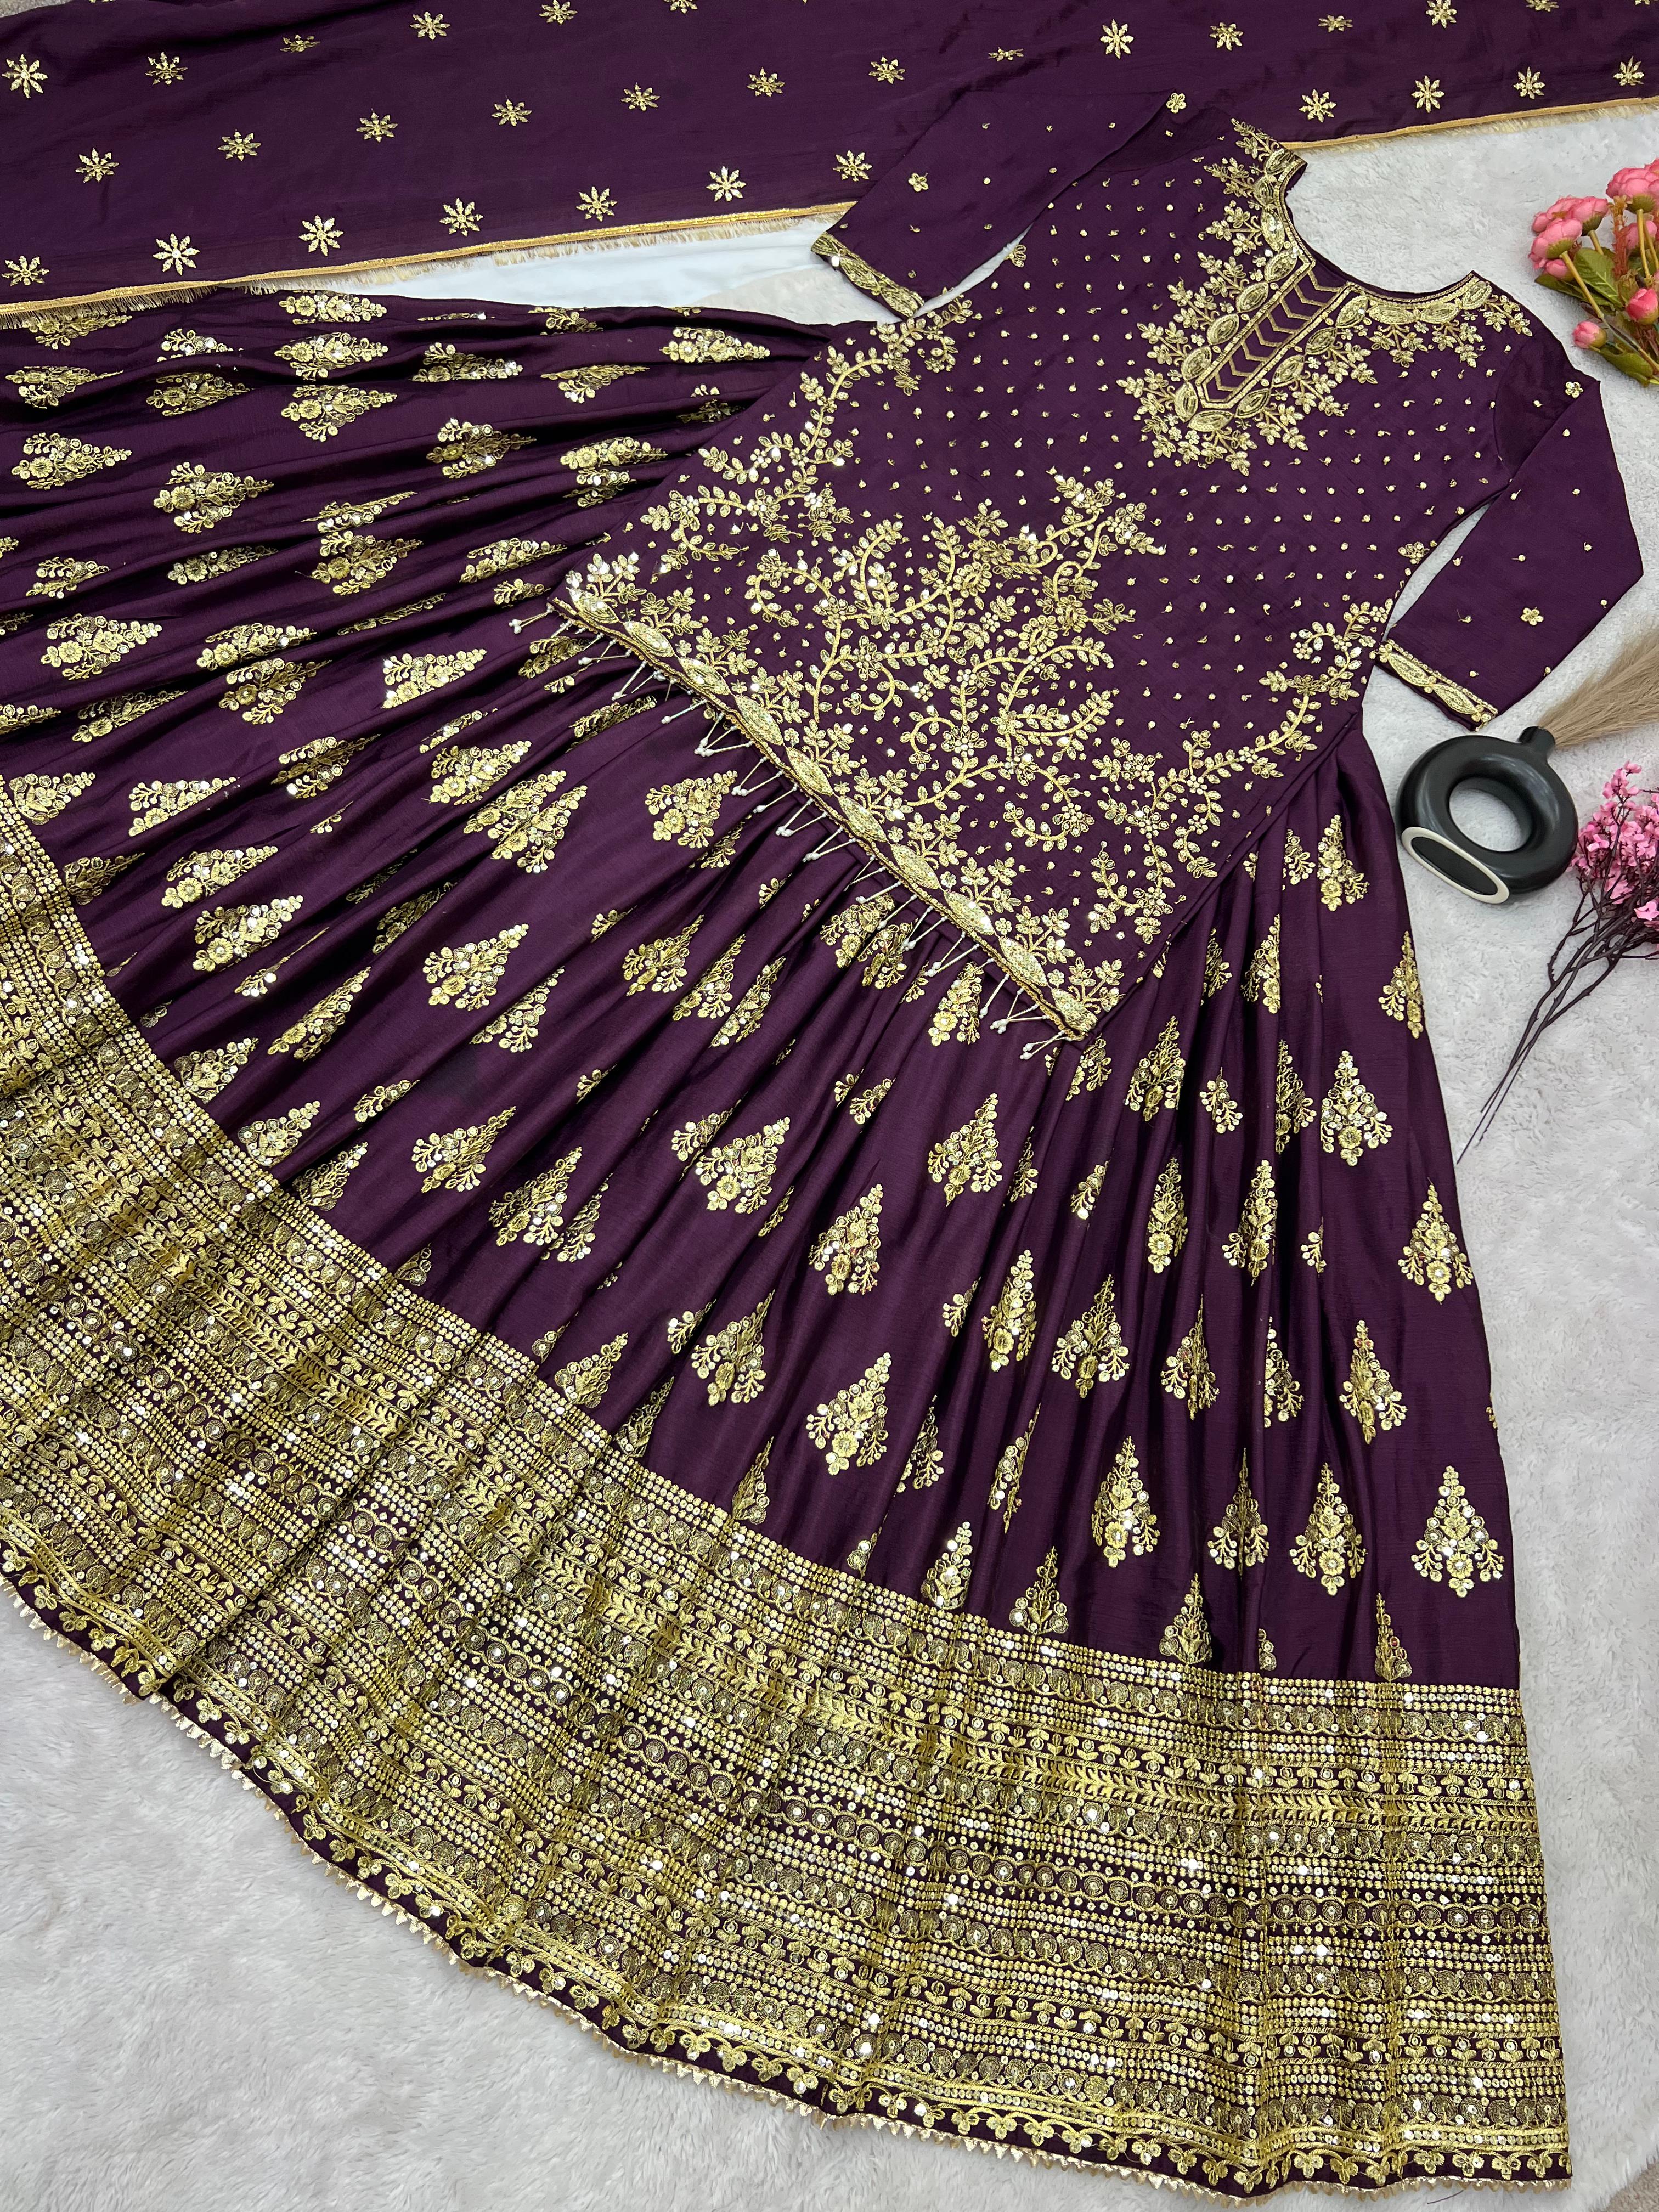 Ceremony Wear Embroidery Work Wine Color Lehenga With Top